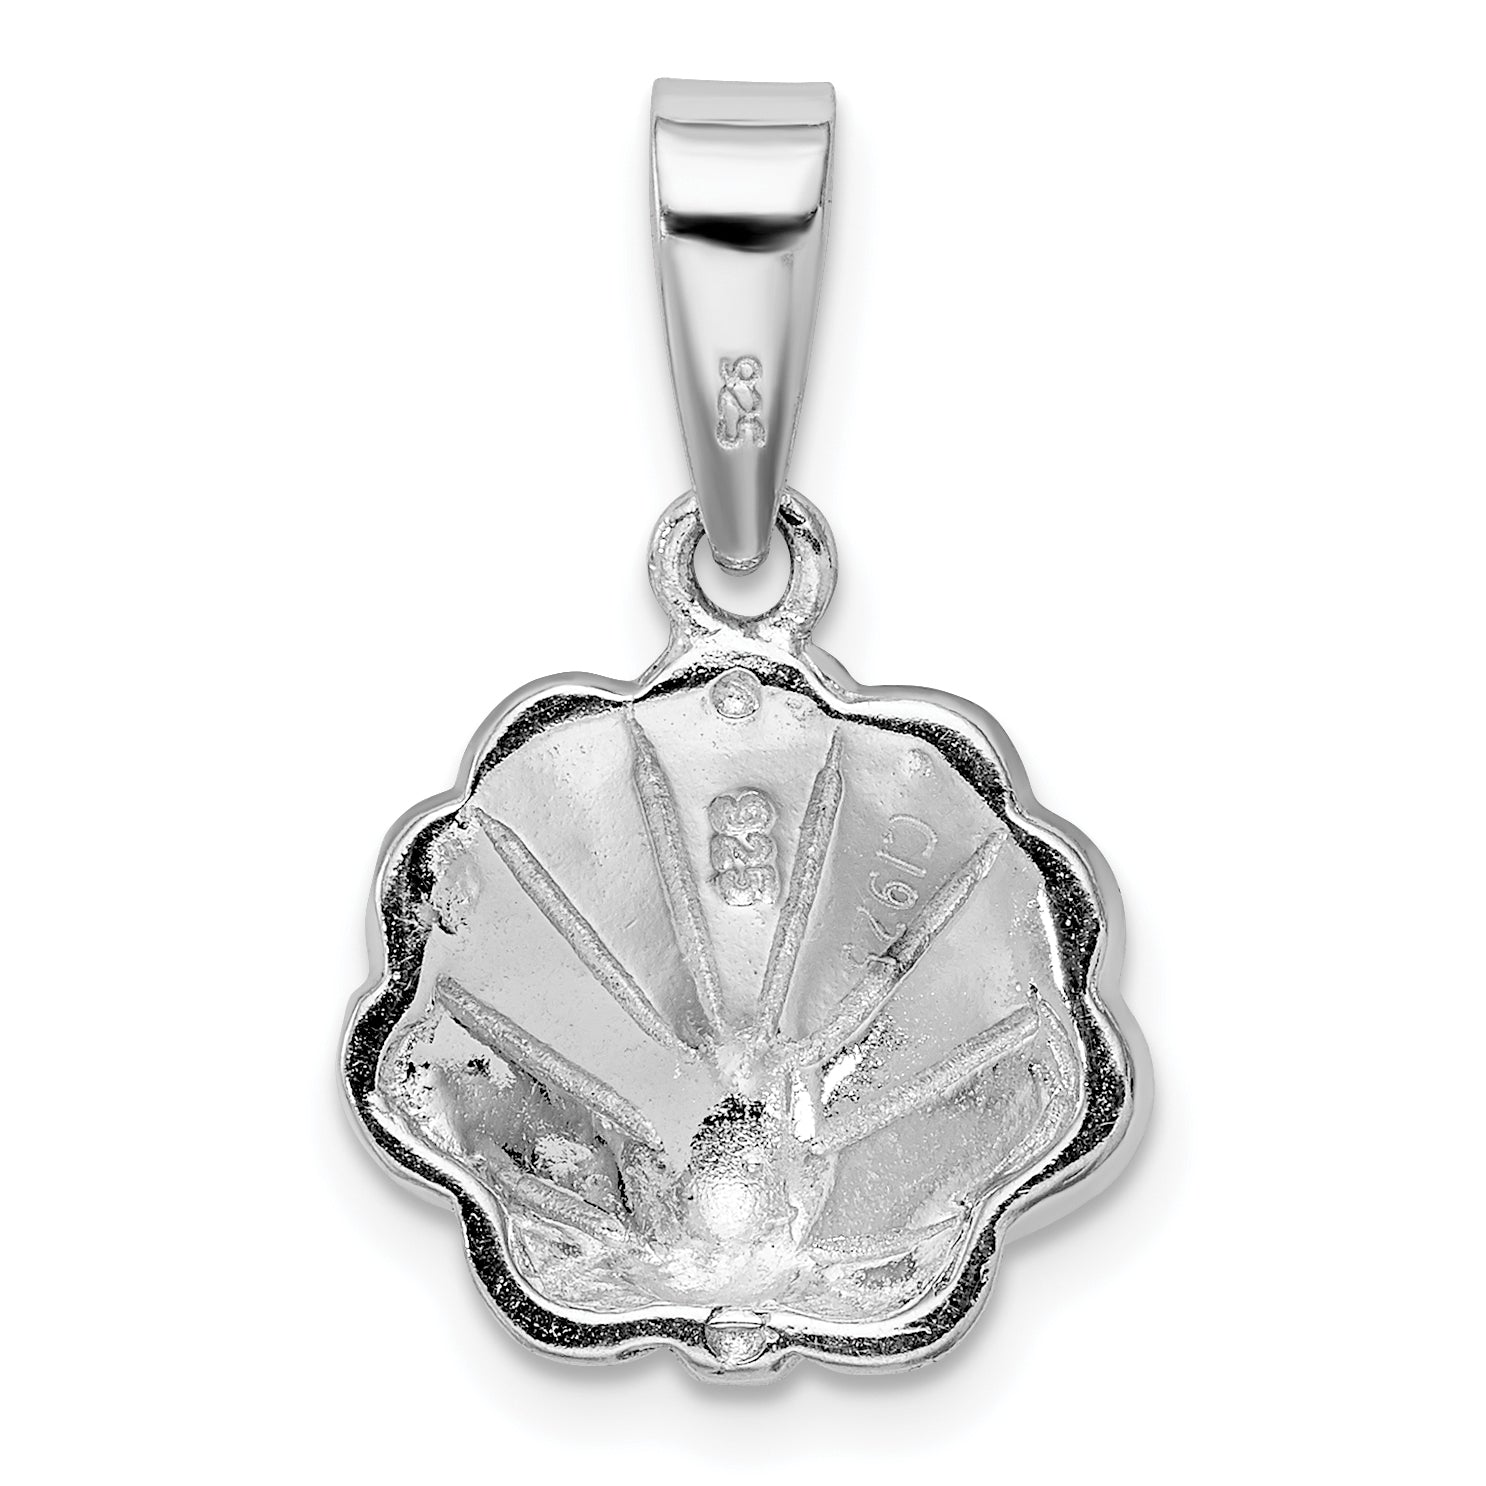 Sterling Silver Rhodium Created Blue Opal Oyster Pendant